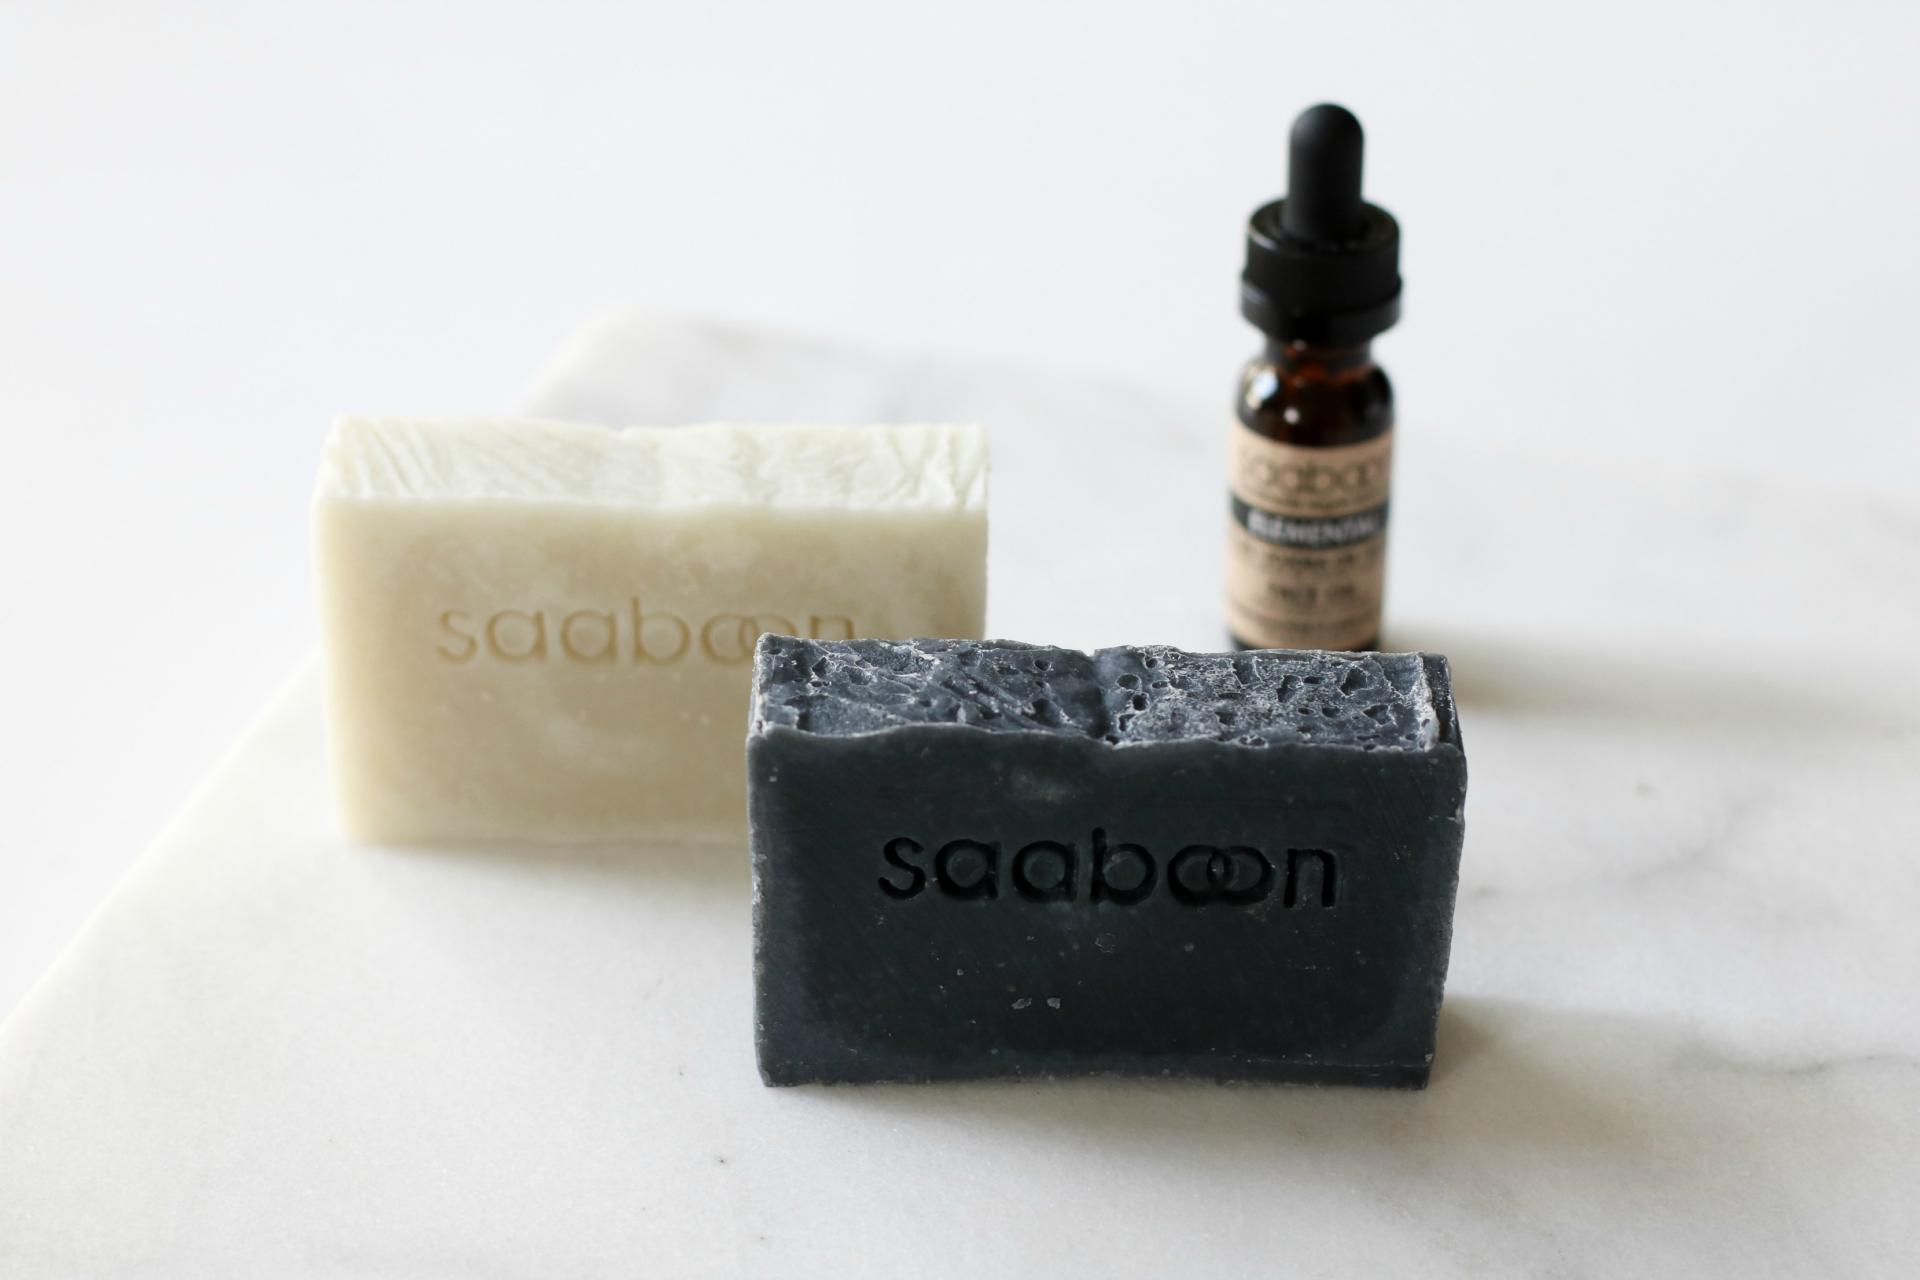 Like natural beauty products? Saaboon's vegan-friendly soaps, face oils, deodorants are some of the best in natural skincare!